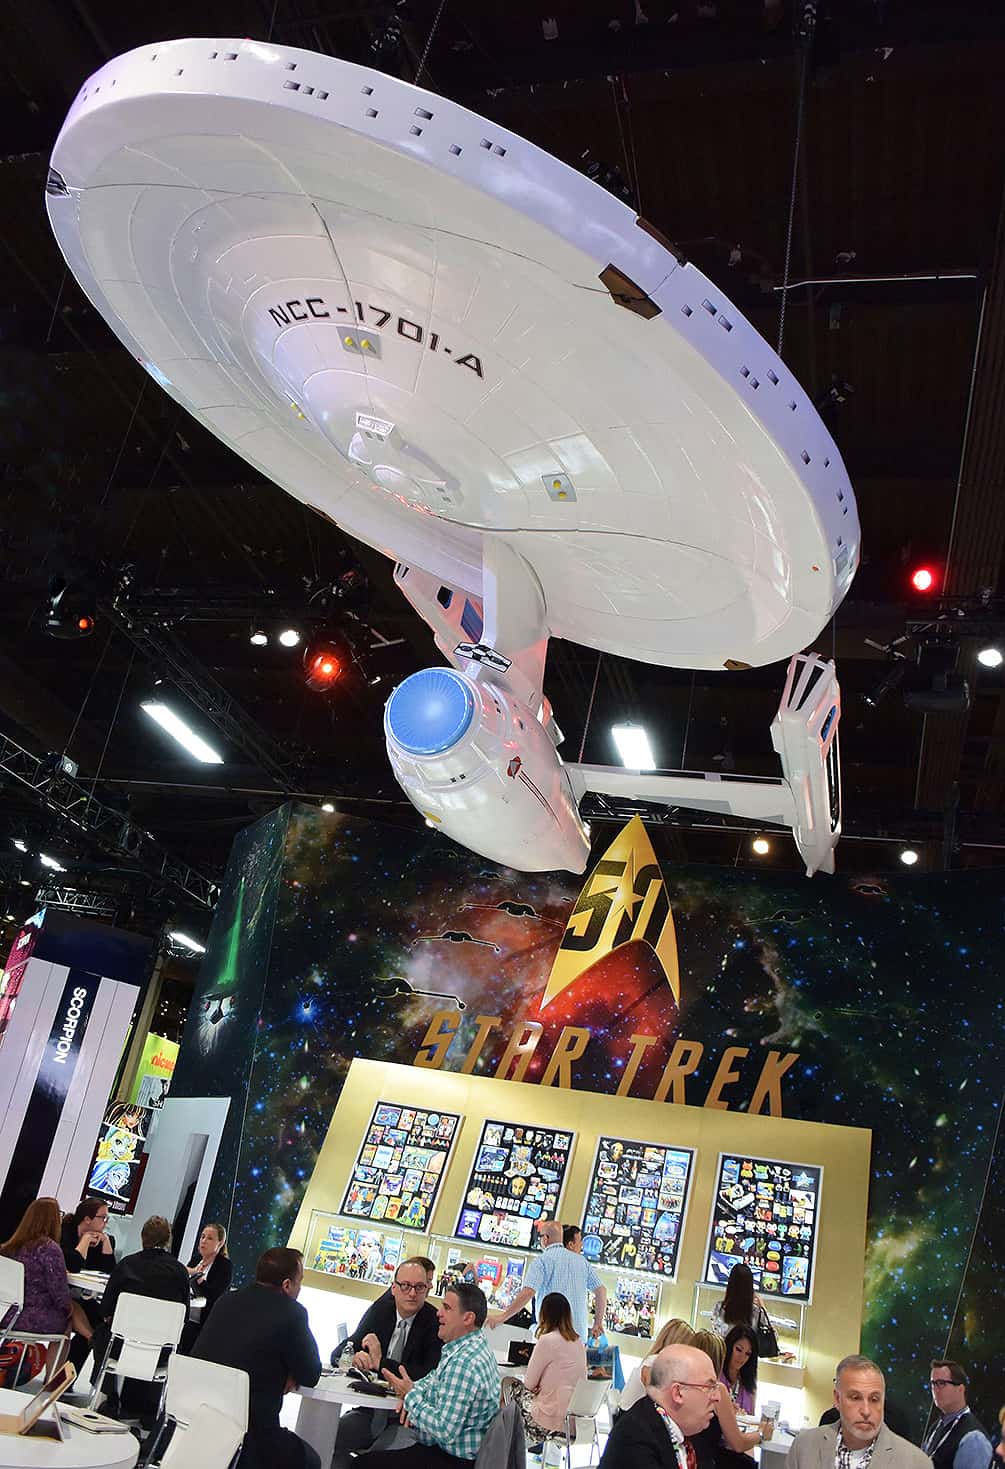 The Star Trek booth at the Licensing Expo